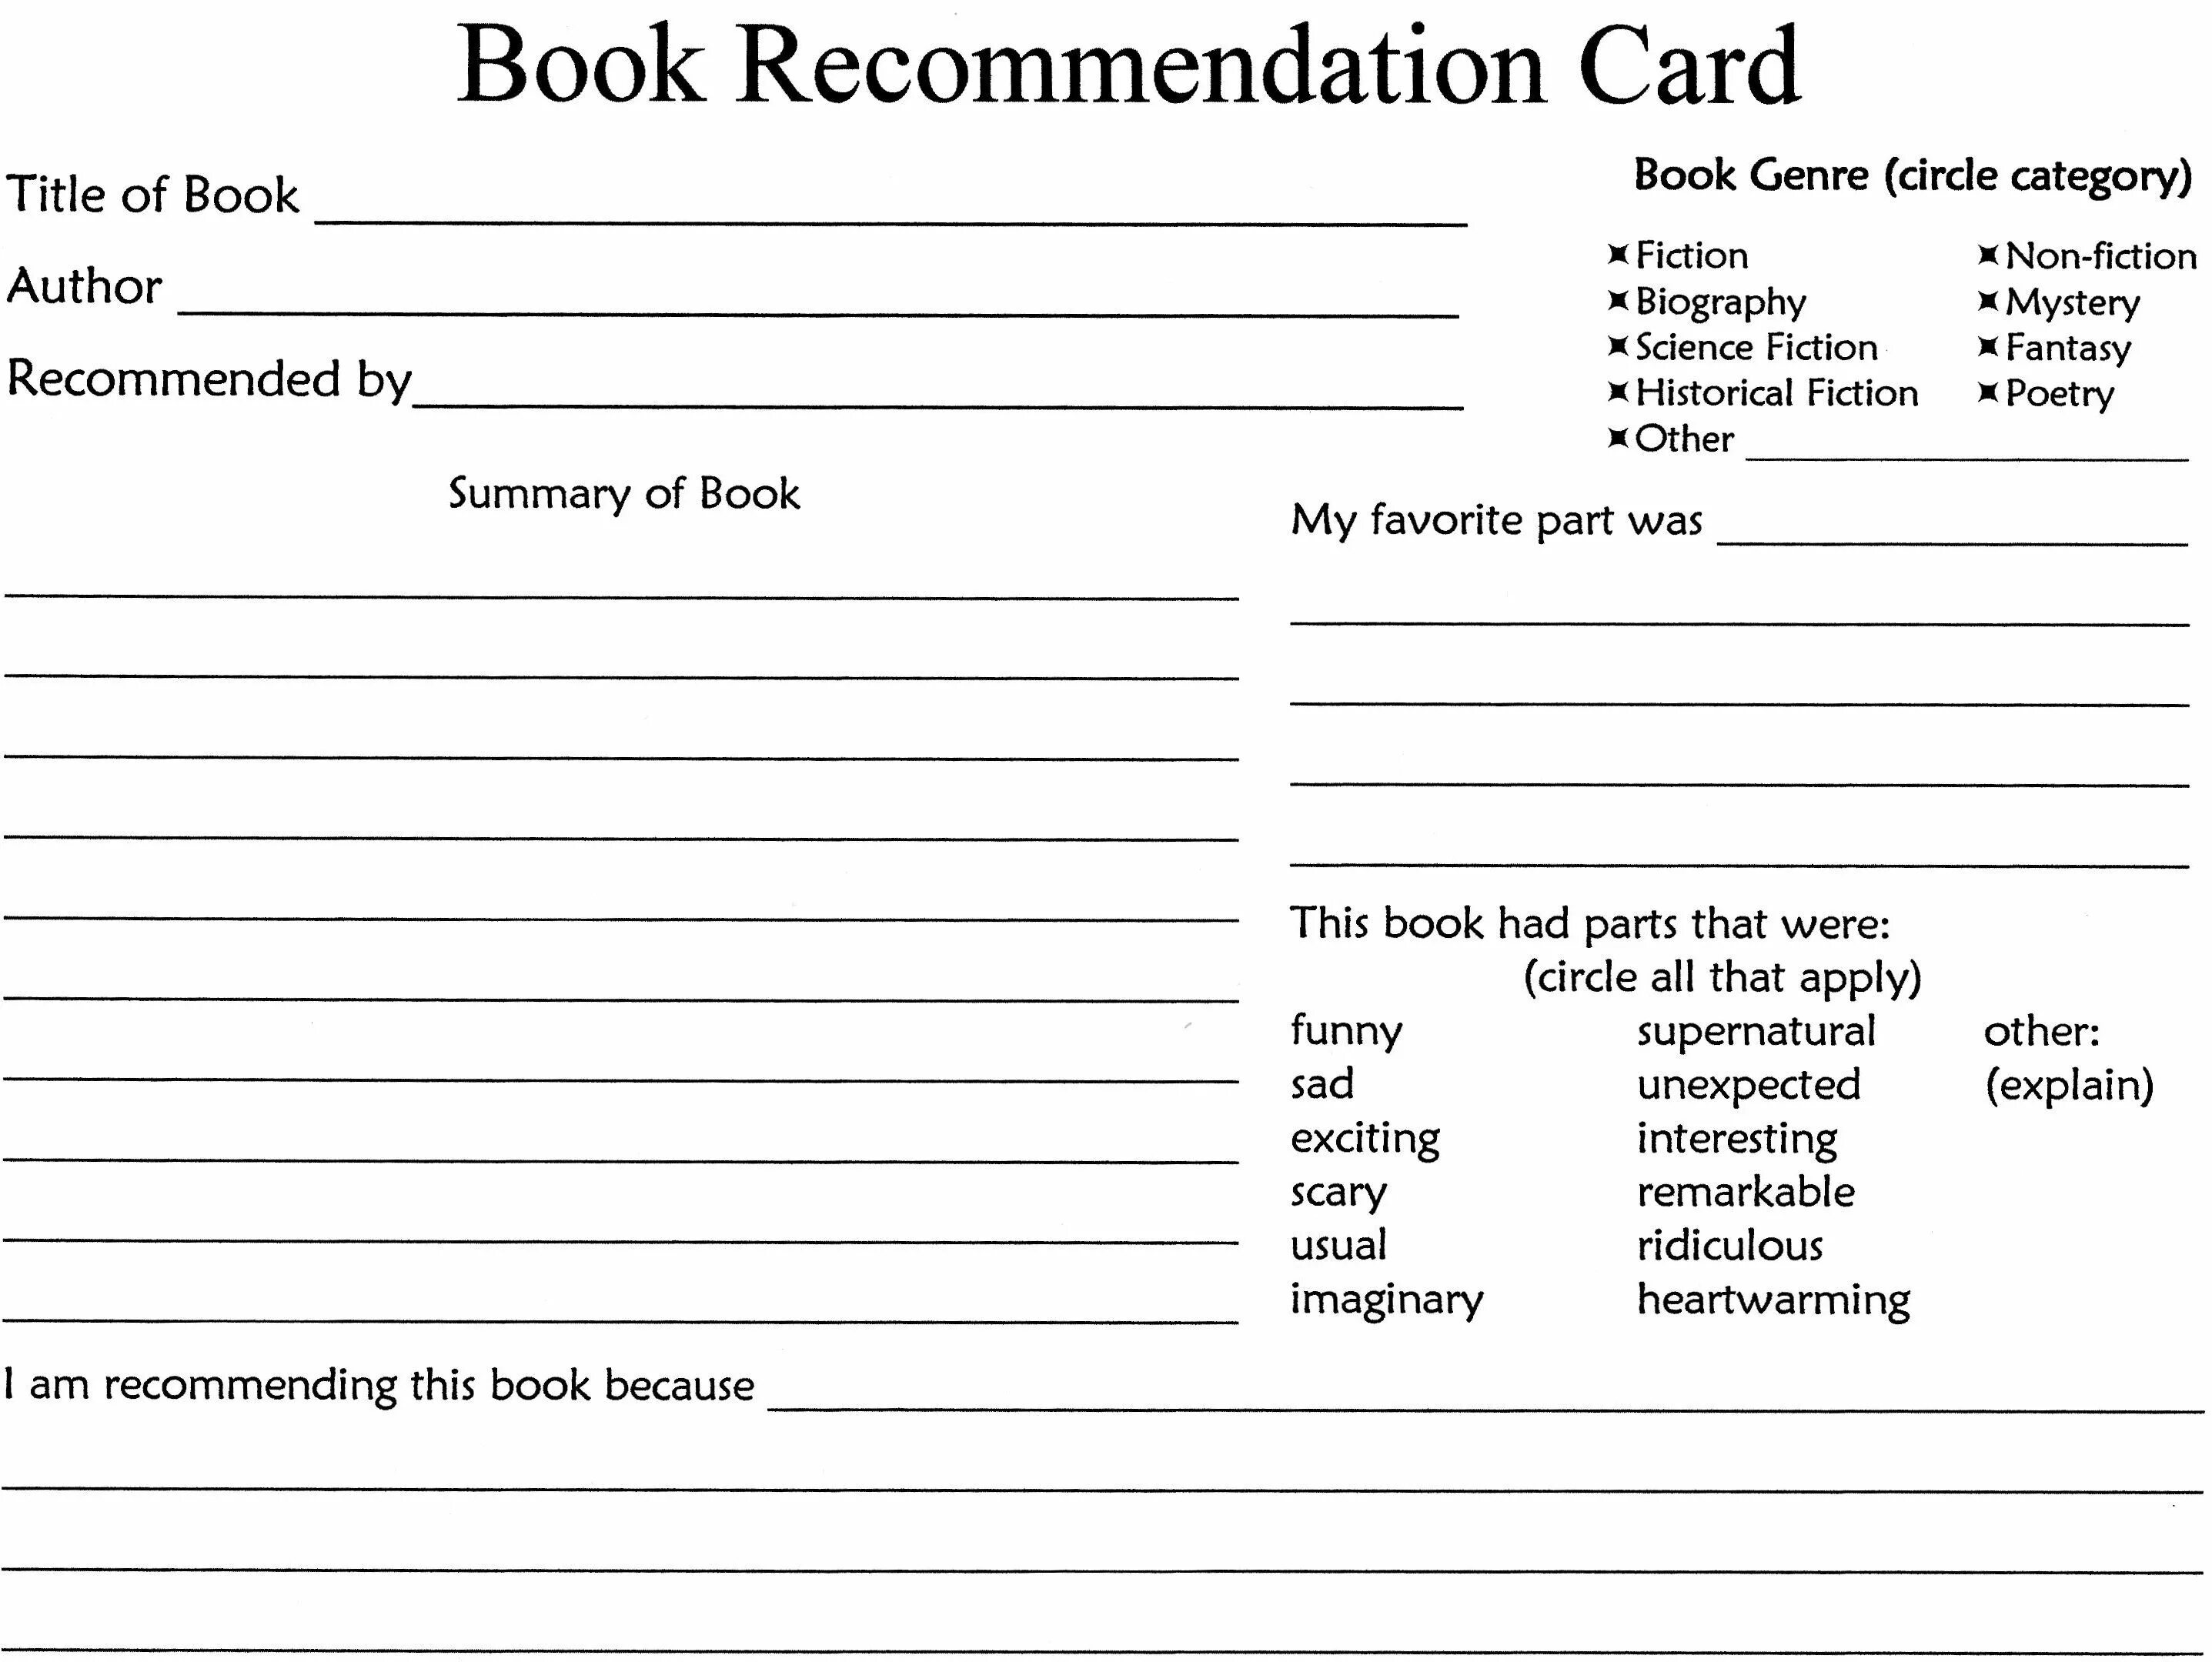 Book Review шаблон. Book Report. Book Review form. Book for recommendations.